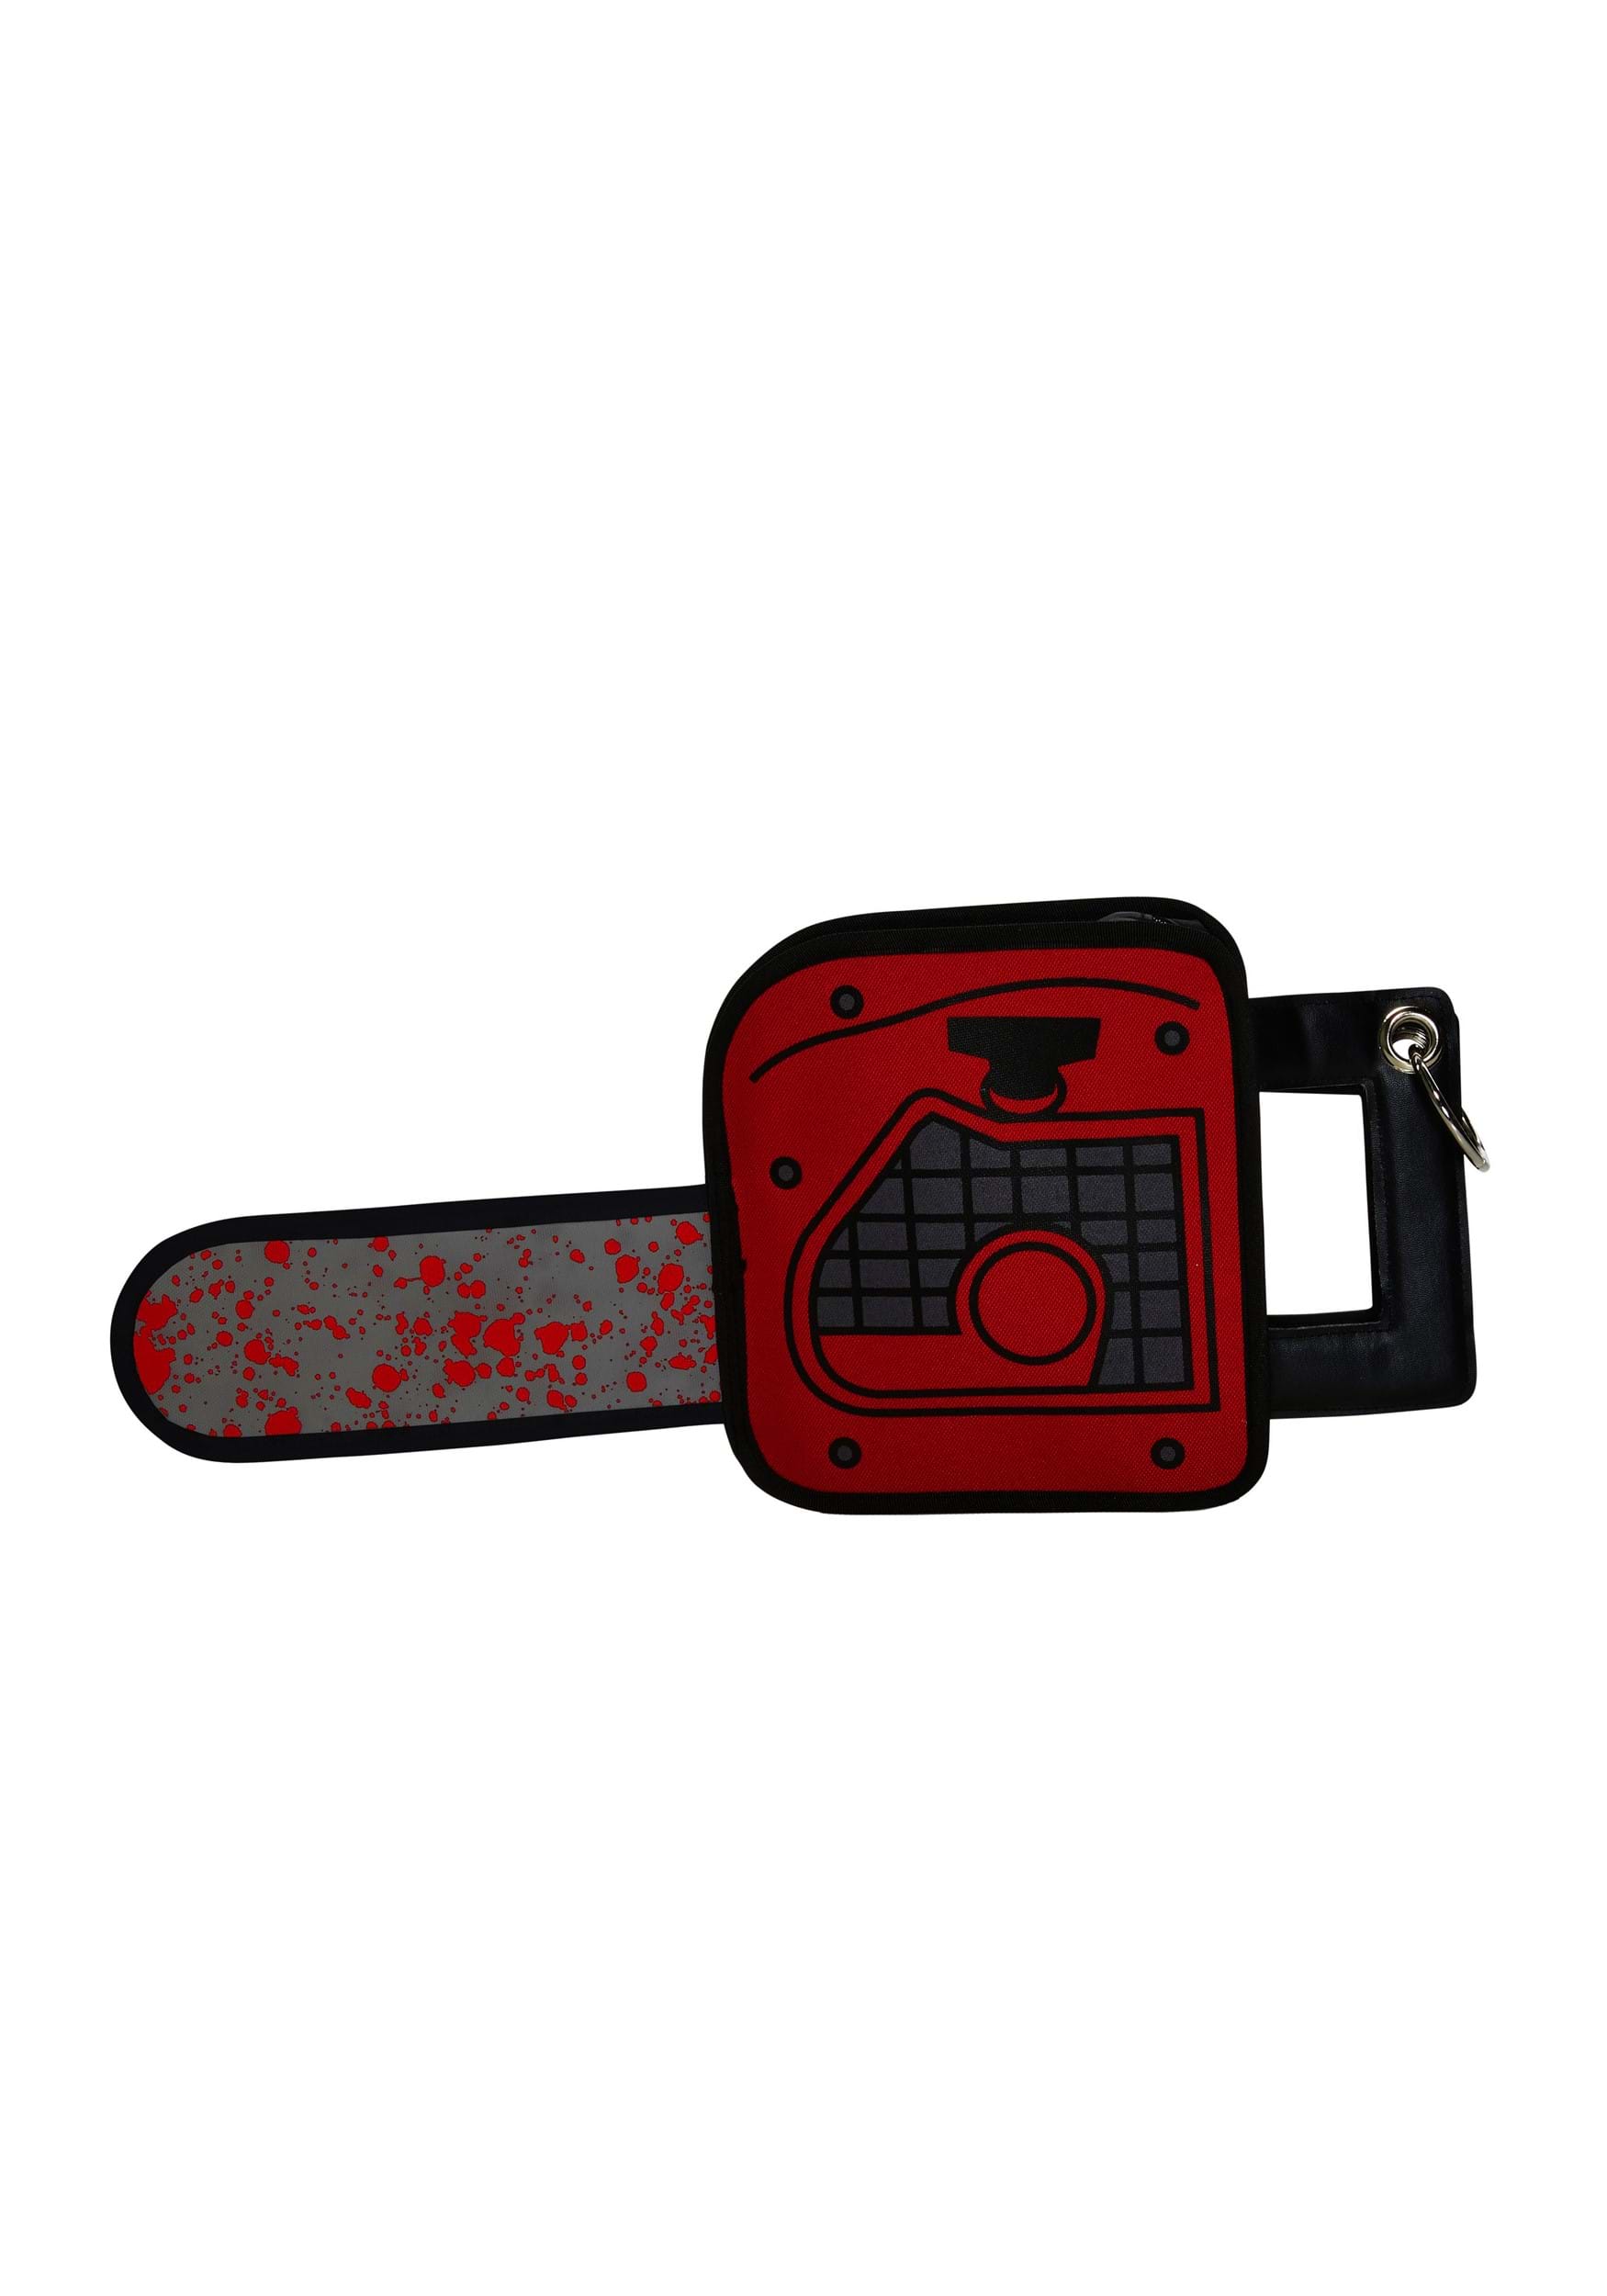 Bloody Chainsaw Costume Bag | Horror Movie Costume Purse